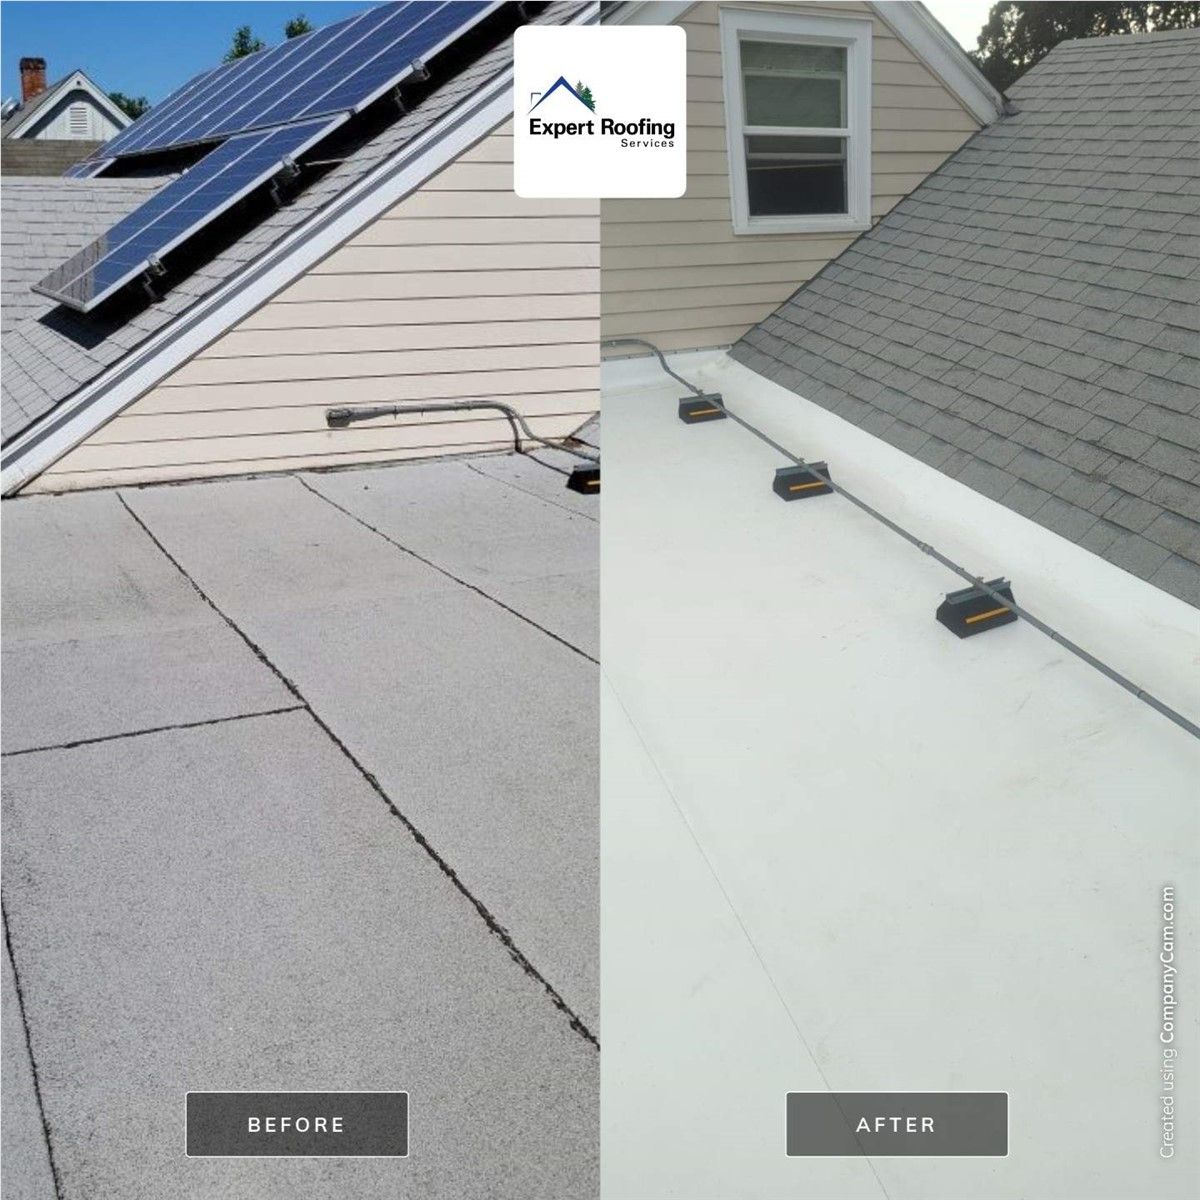 Before And After Comparison — Eugene, OR — Expert Roofing Services